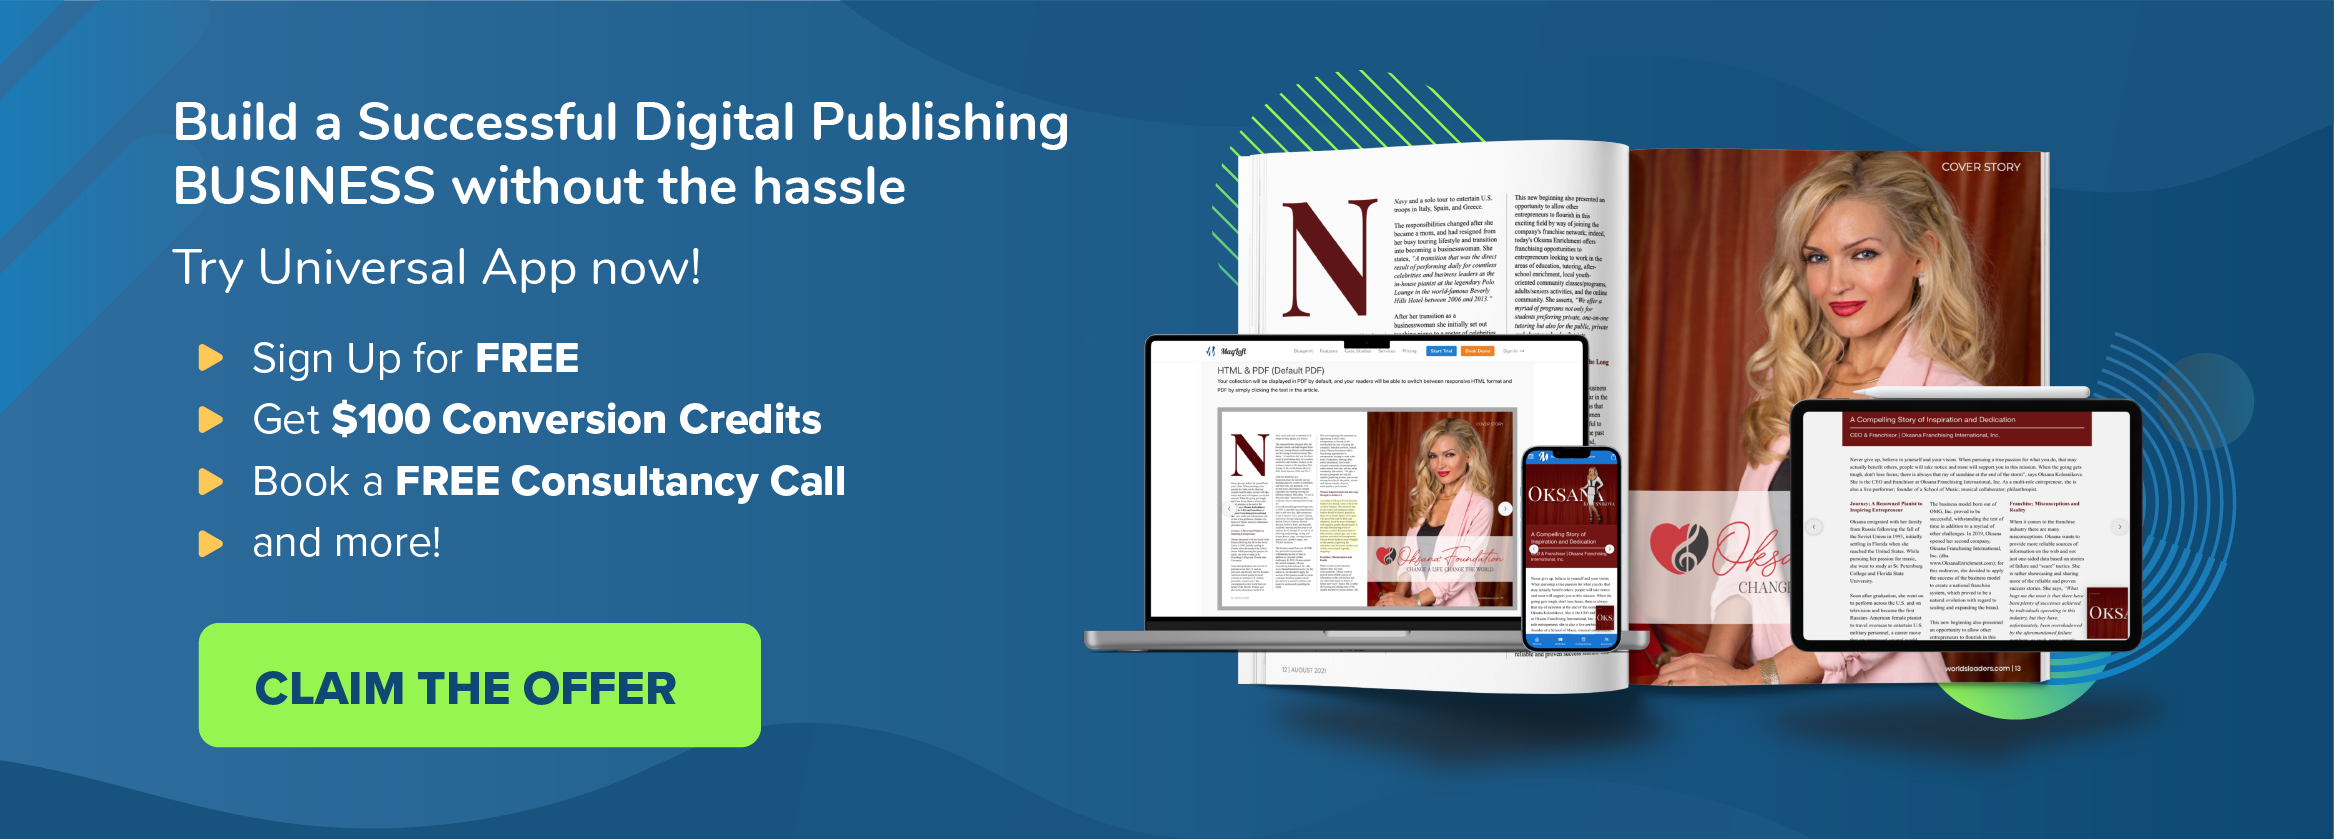 Try Universal App for FREE and Build Your Successful Digital Publishing Business